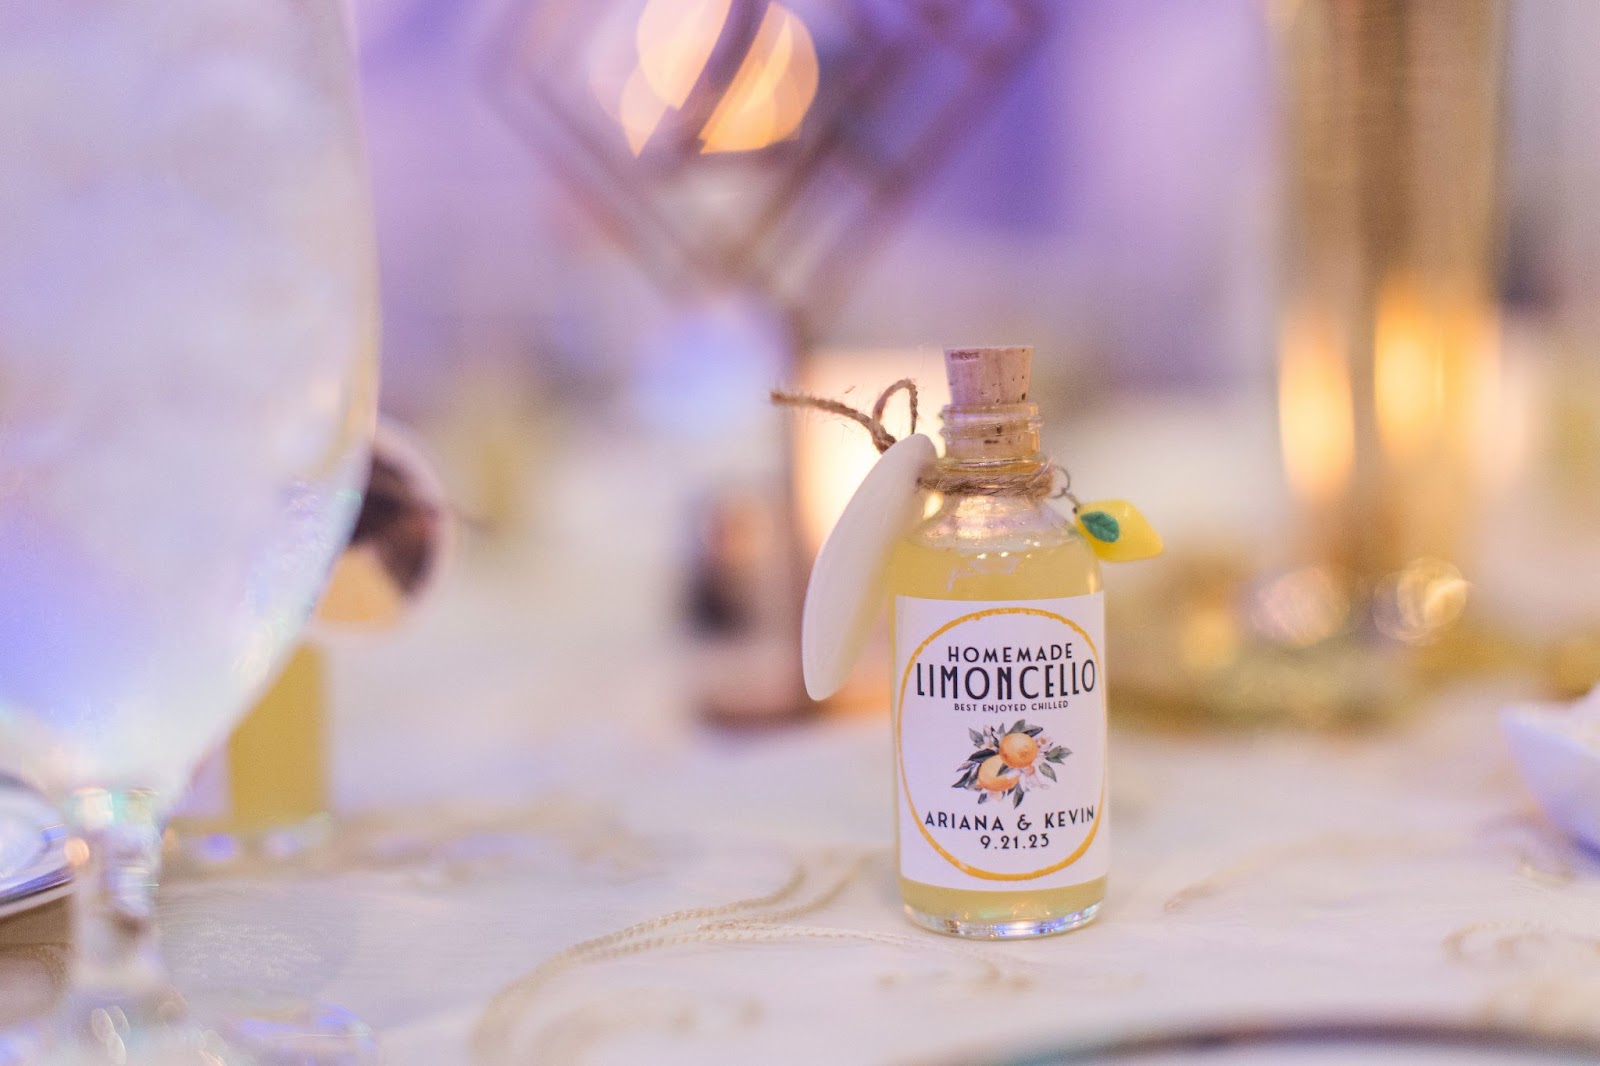 Unique Wedding Favors: 6 Creative Ideas Your Guests Will Love